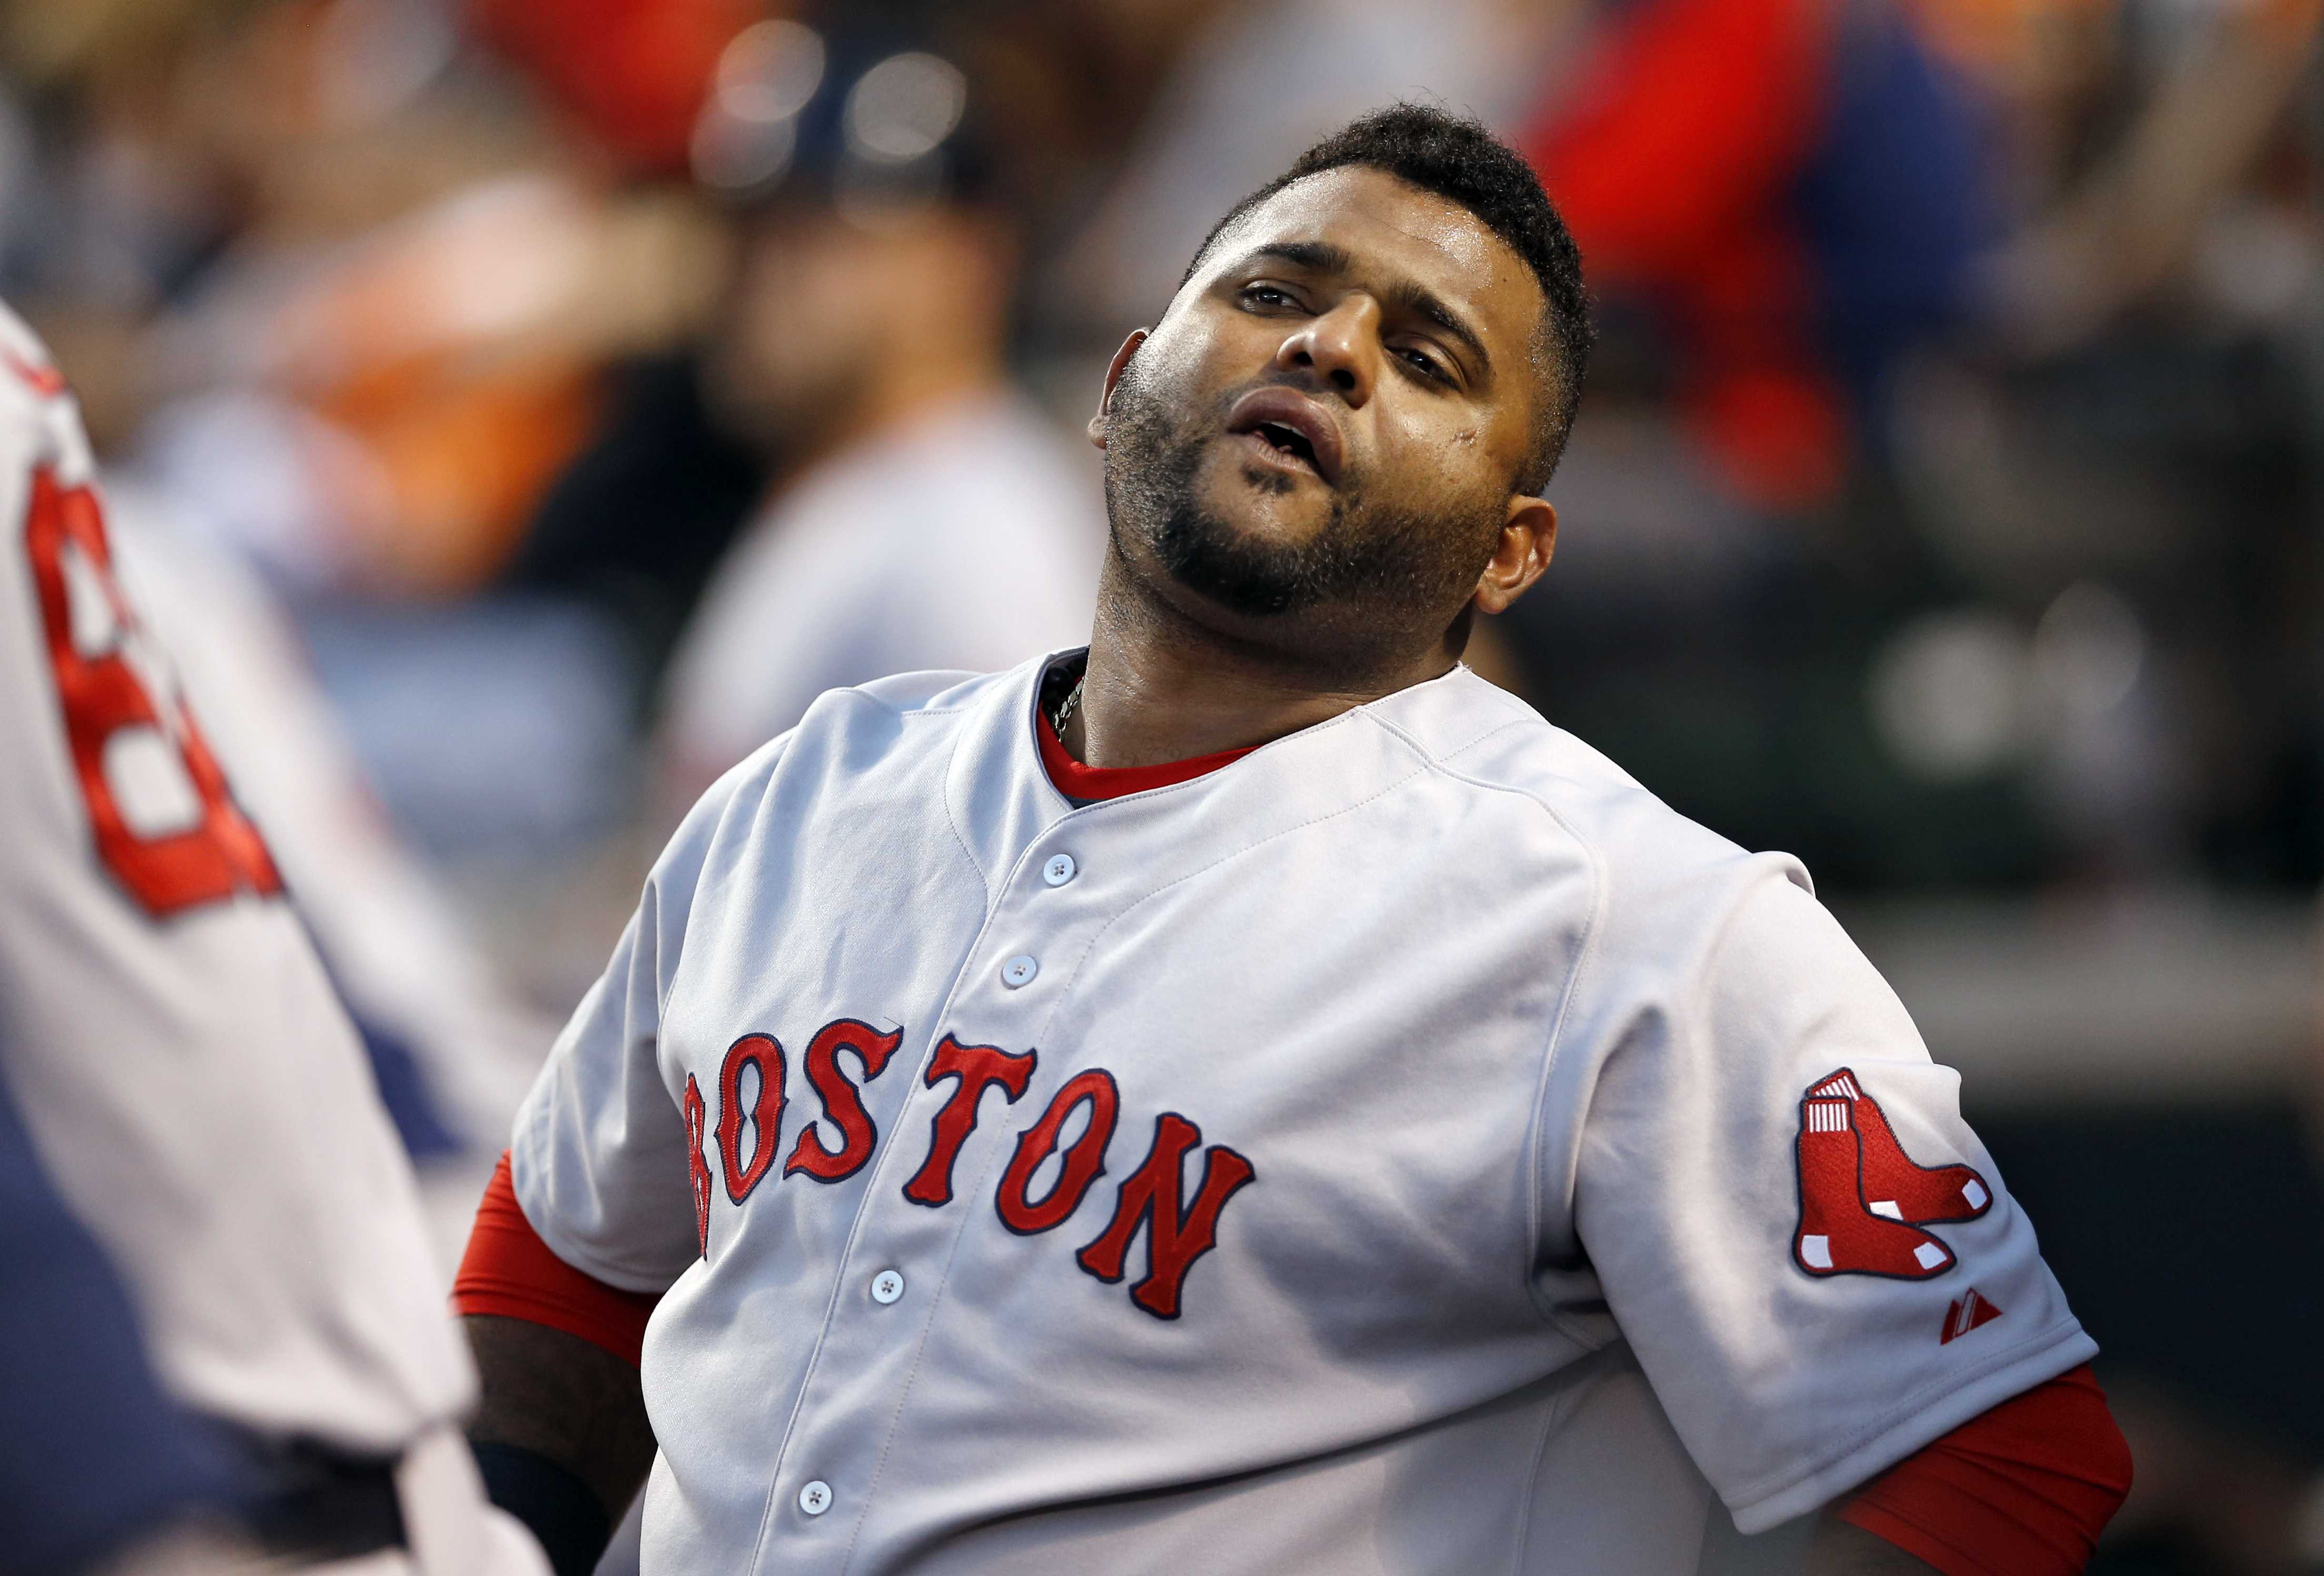 You won't believe what baseball player Pablo Sandoval looks like now